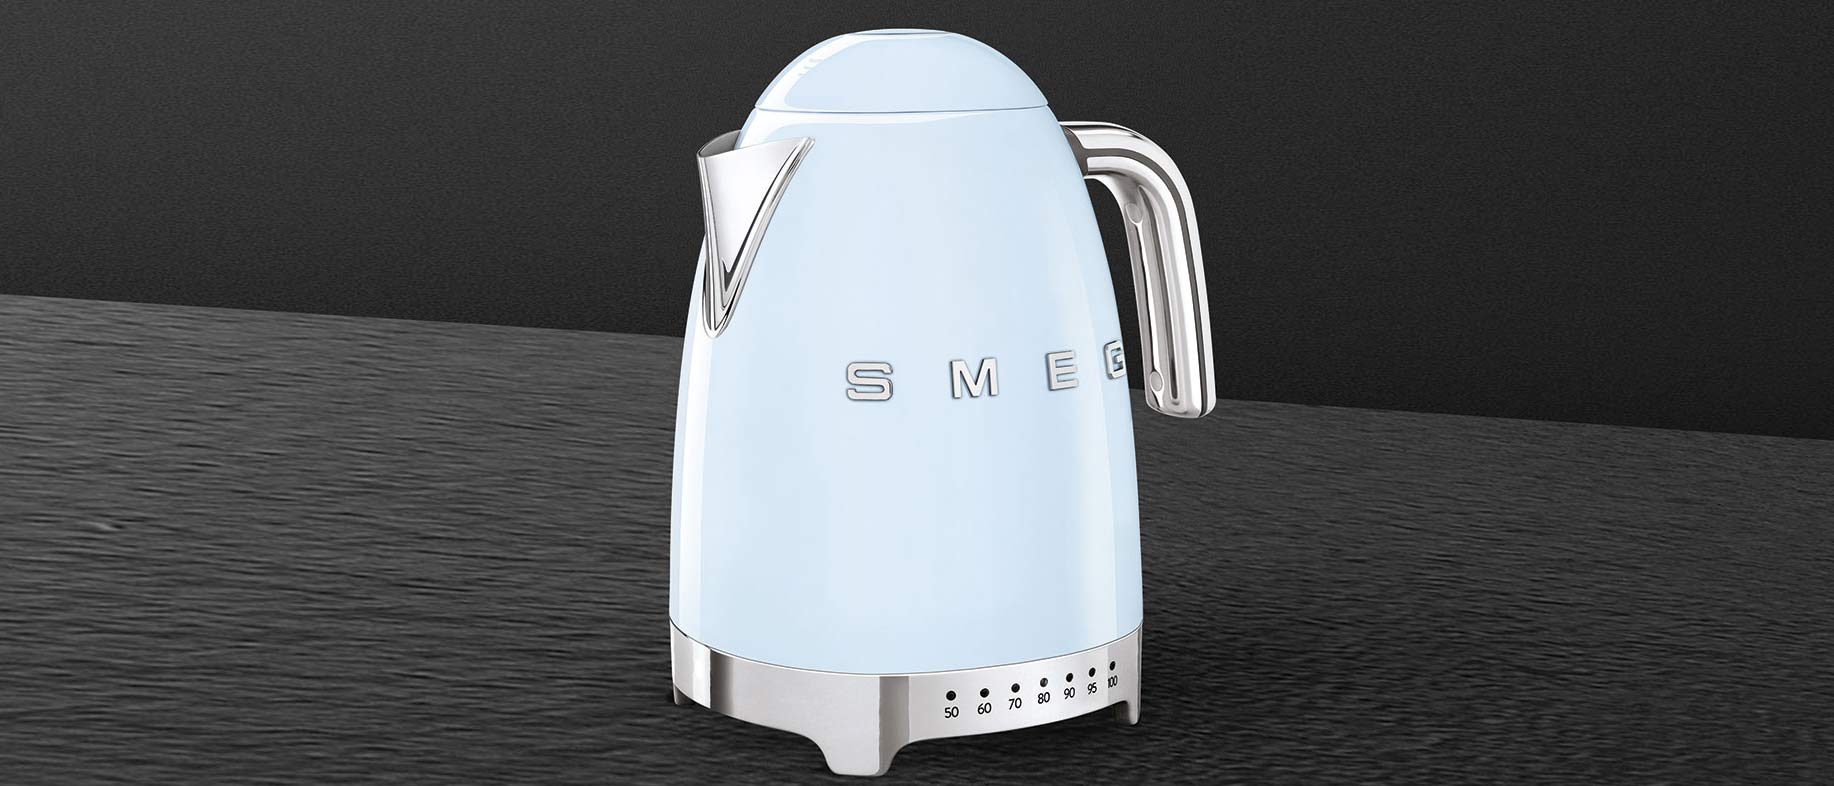  Smeg Cream Stainless Steel 50's Retro Variable Temperature  Kettle: Home & Kitchen